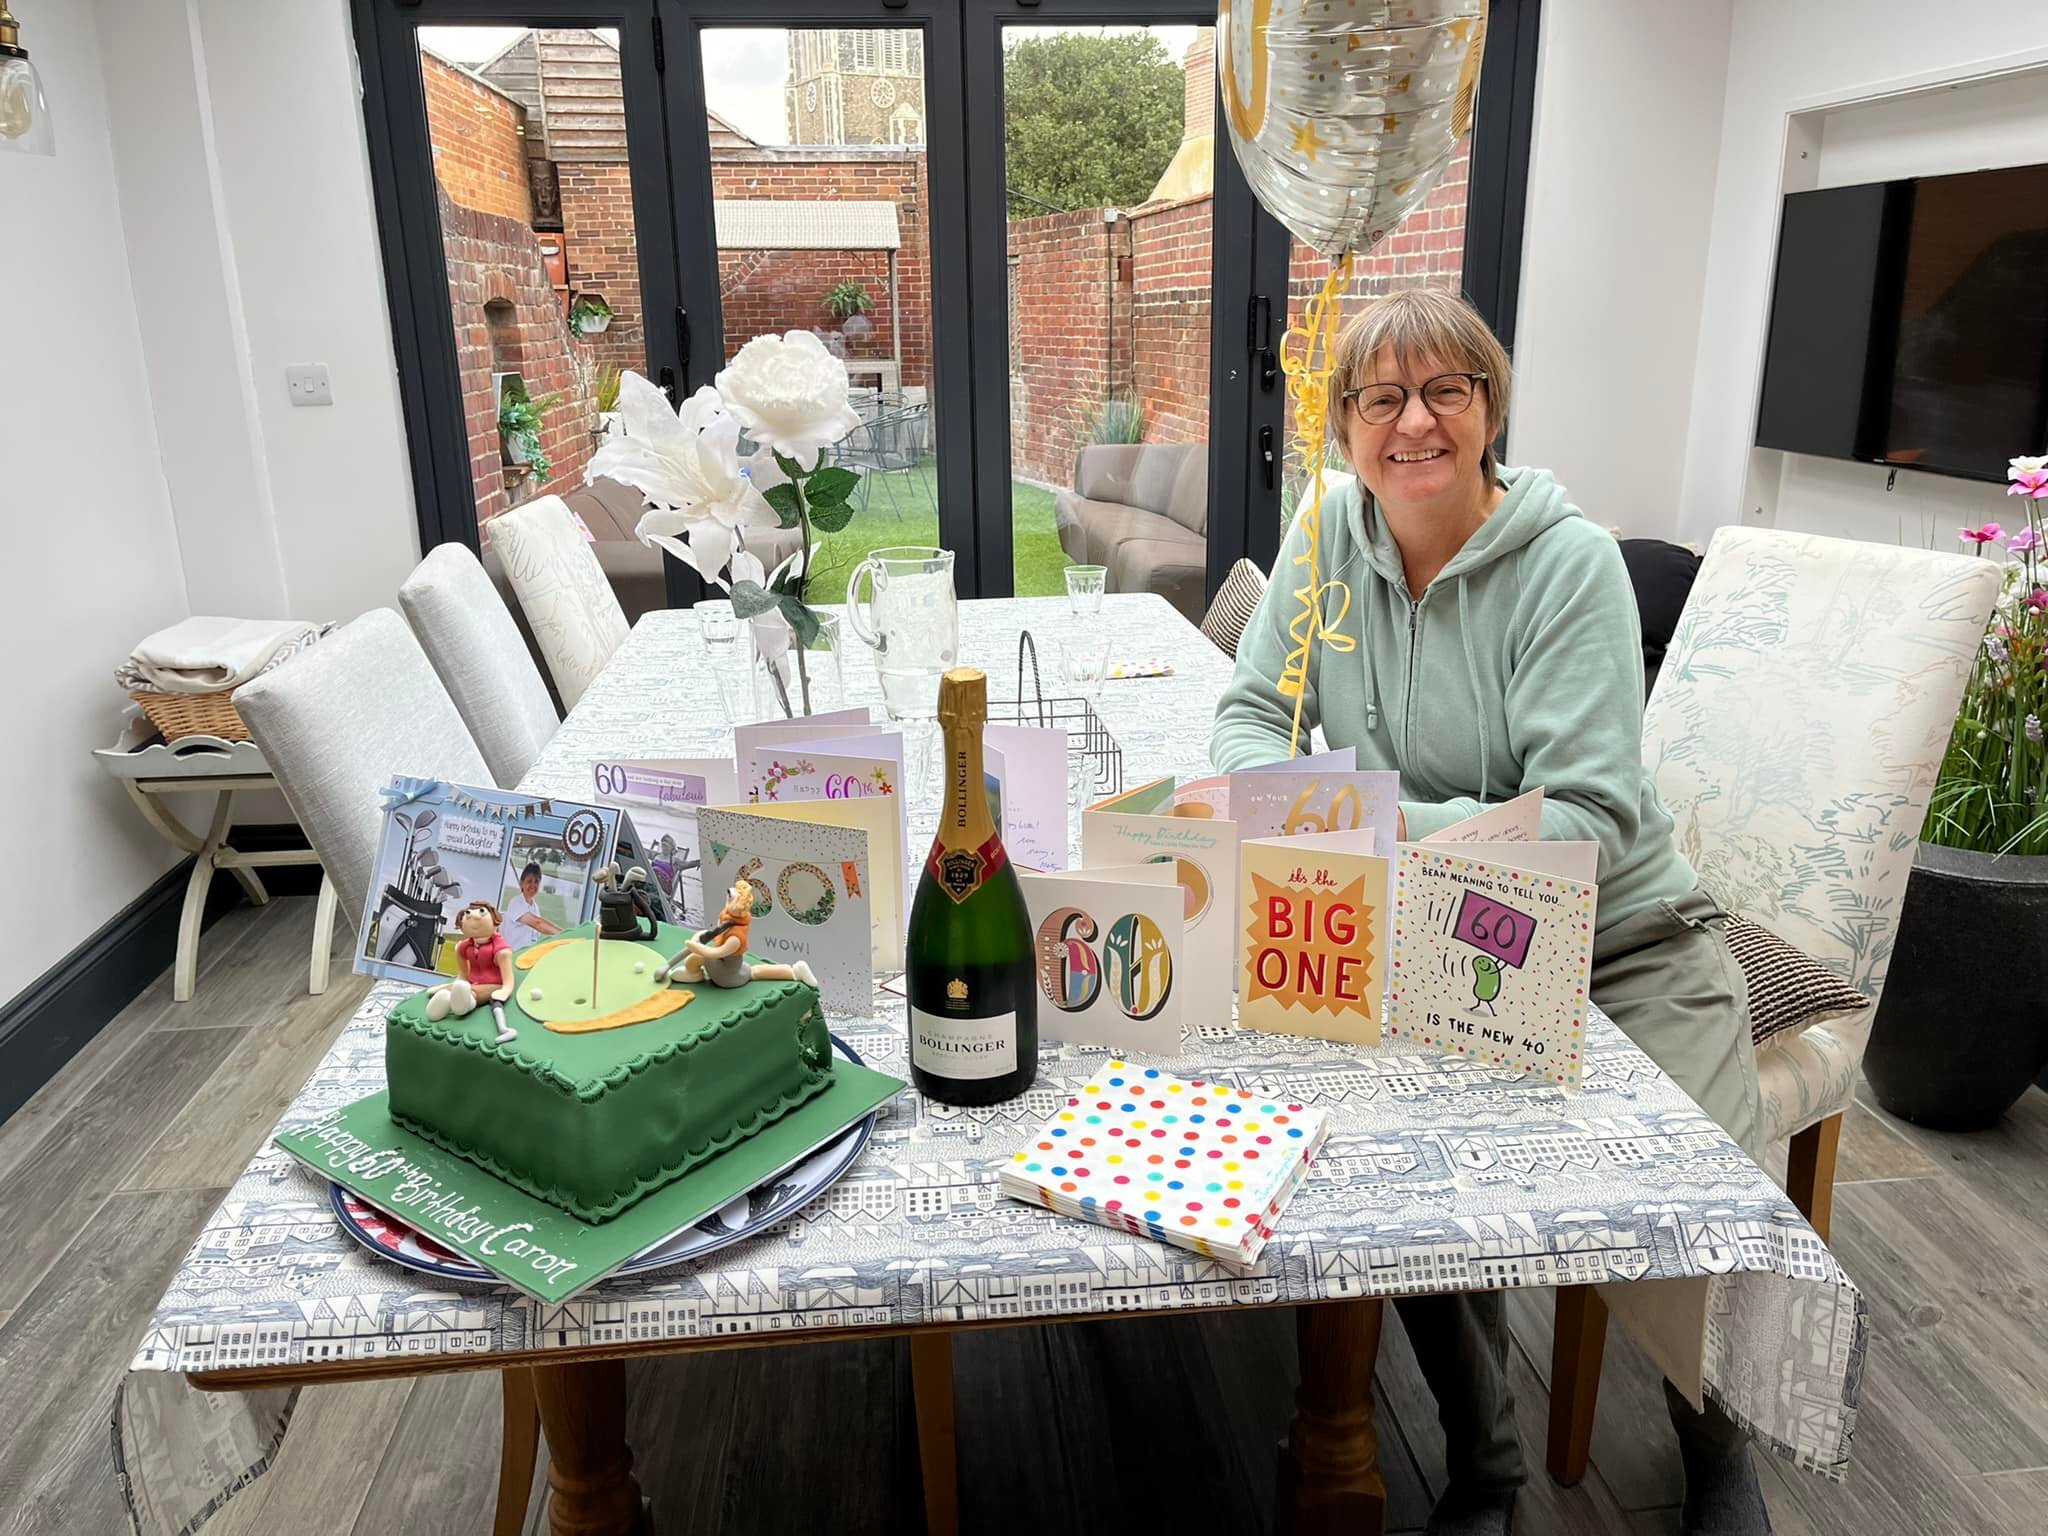 The 60th Birthday celebrations continue &hellip;